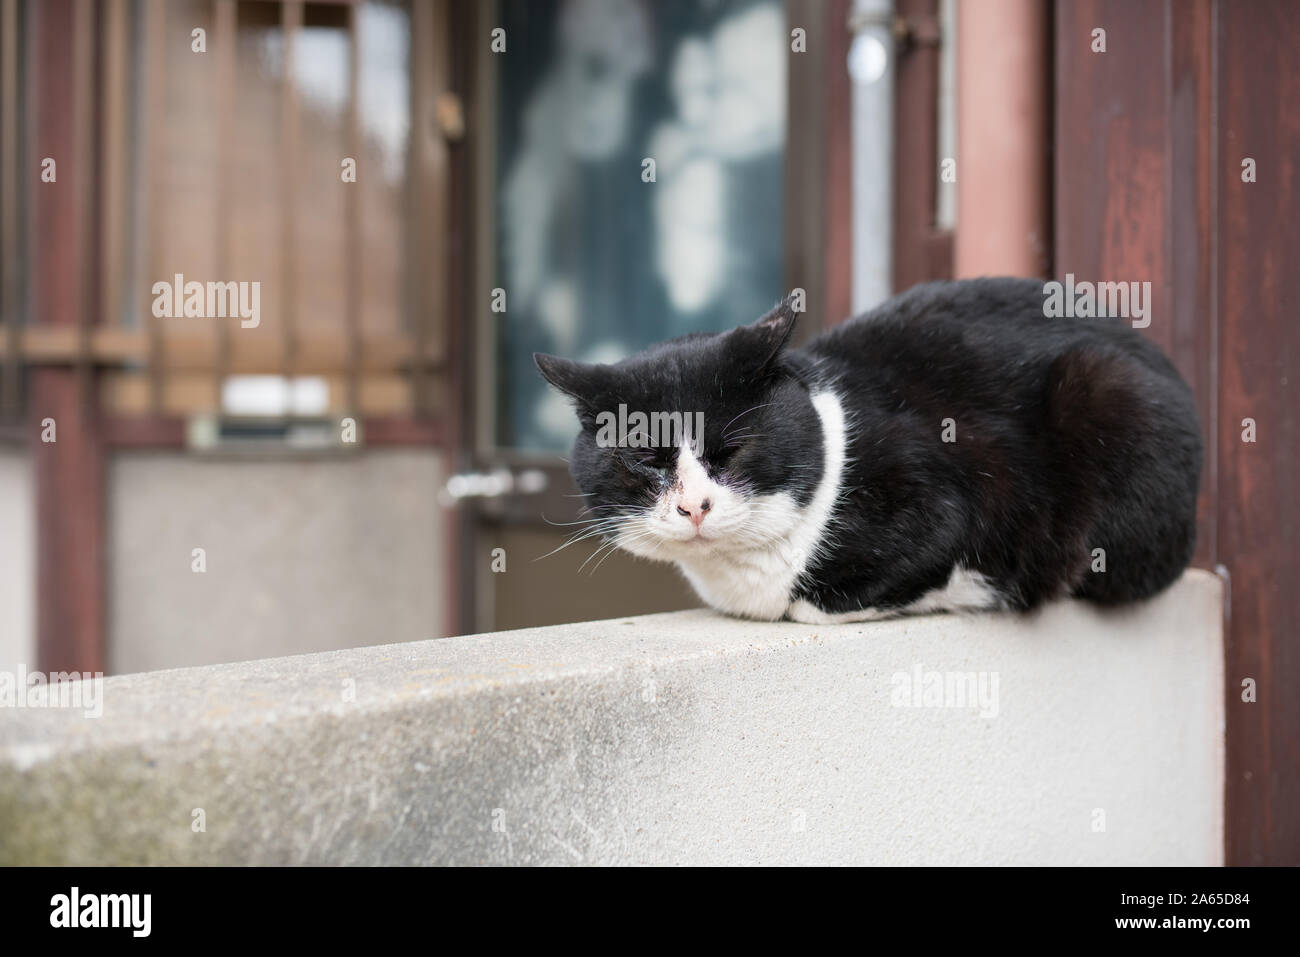 A black and white colored cat sitting on a wall Stock Photo